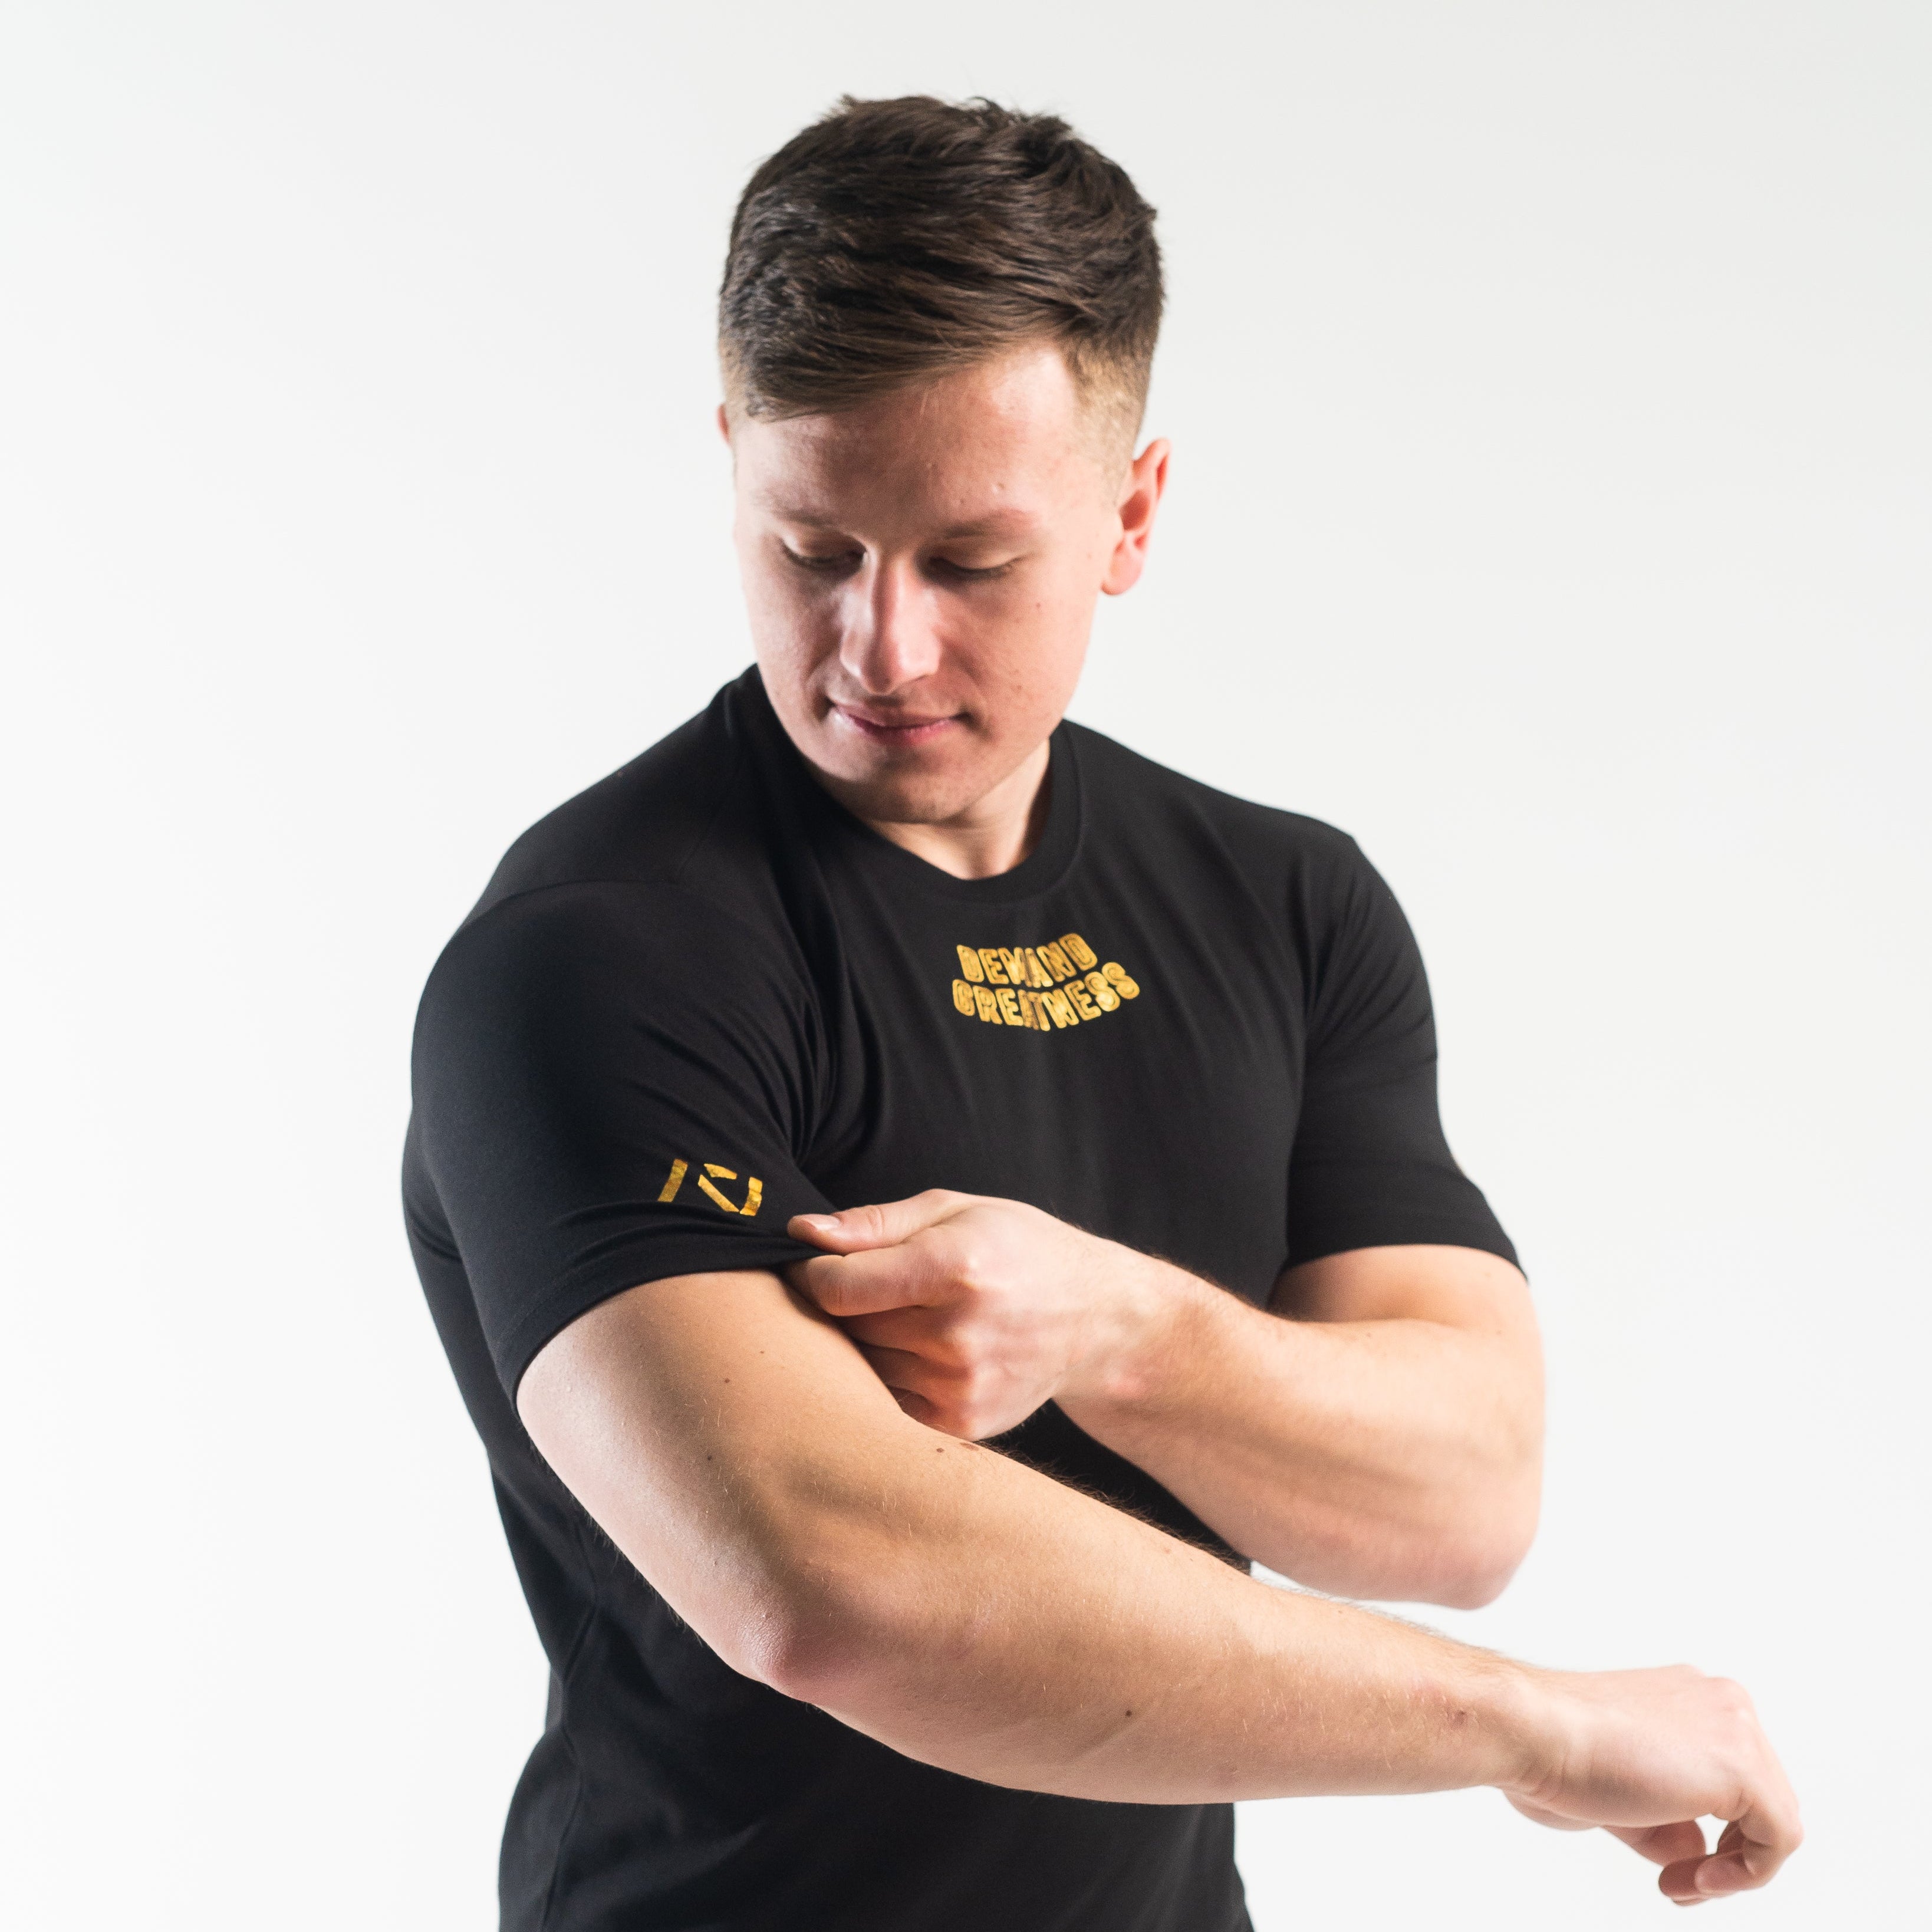 DG23 Gold Standard is our new meet shirt design highlighting Demand Greatness with a double outline font to showcase your impact on the platform. The DG23 Meet Shirt is IPF Approved. Shop the full A7 Powerlifting IPF Approved Equipment collection. The IPF Approved Kit includes Powerlifting Singlet, A7 Meet Shirt, A7 Zebra Wrist Wraps, A7 Deadlift Socks, Hourglass Knee Sleeves (Stiff Knee Sleeves and Rigor Mortis Knee Sleeves). All A7 Powerlifting Equipment shipping to UK, Norway, Switzerland and Iceland. 